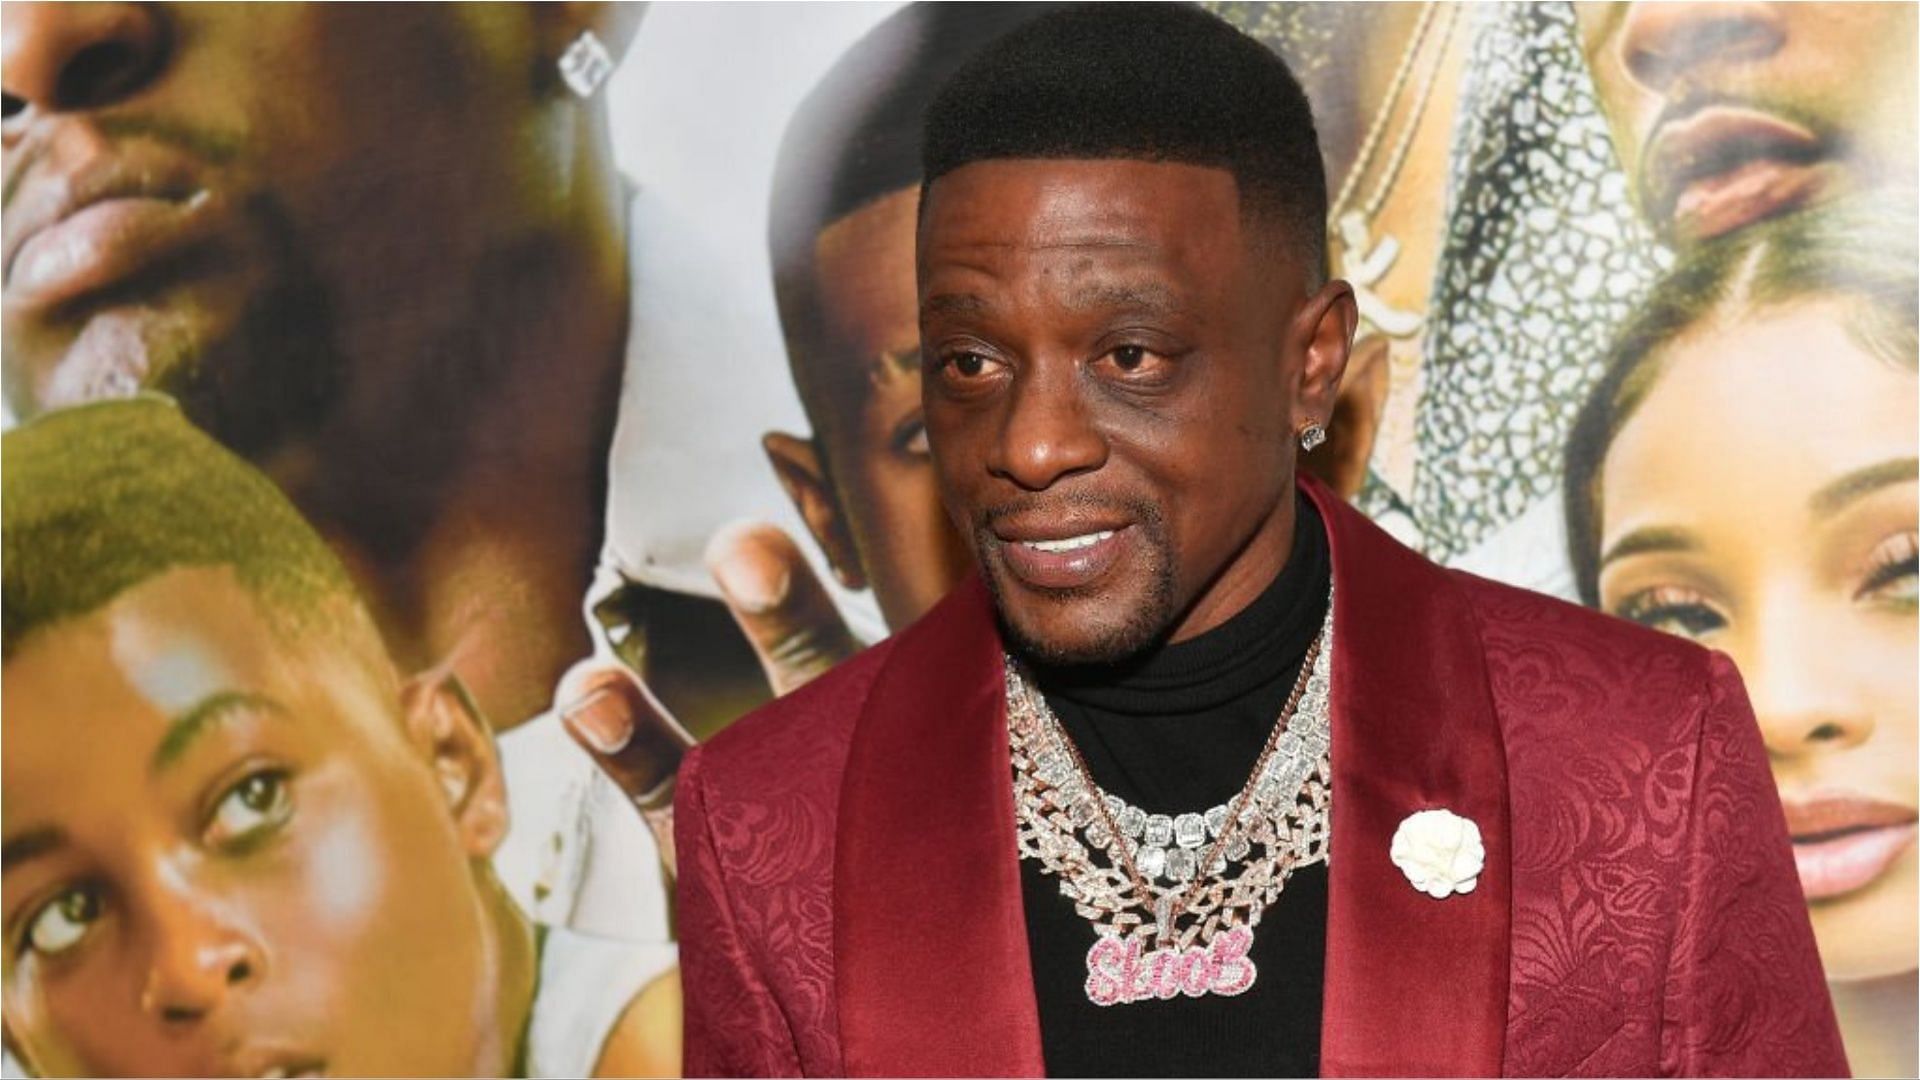 Boosie Badazz had to undergo surgery for his cancer (Image via Paras Griffin/Getty Images)